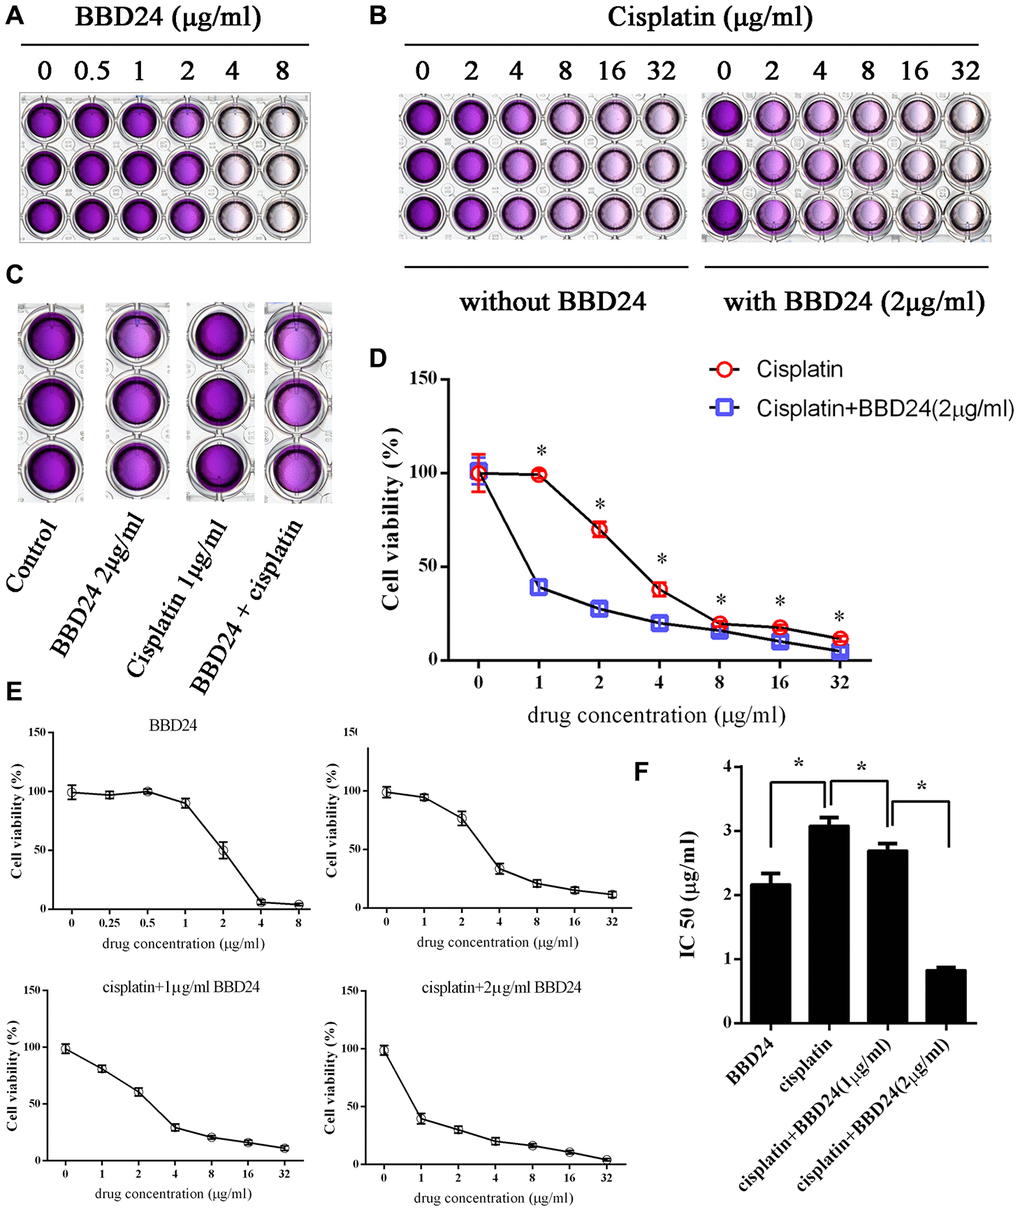 BBD24 improved cisplatin sensitivity in vitro. HOS cells were treated with BBD24 and/or cisplatin for 72h, then MTT assay was used to measure the cell viability. (A, B) HOS cells were treated with different concentrations of BBD24 or cisplatin. (C) HOS cells were treated with BBD24 (2 μg/ml) and/or cisplatin (1 μg/ml). (D) Cell viability of HOS in cisplatin group and cisplatin+BBD24 group. (E, F) IC50 of BBD24, cisplatin, cisplatin+BBD24 (1 μg/ml) and cisplatin+BBD24 (2 μg/ml). Results were expressed as means ± SD of three independent experiments. * P